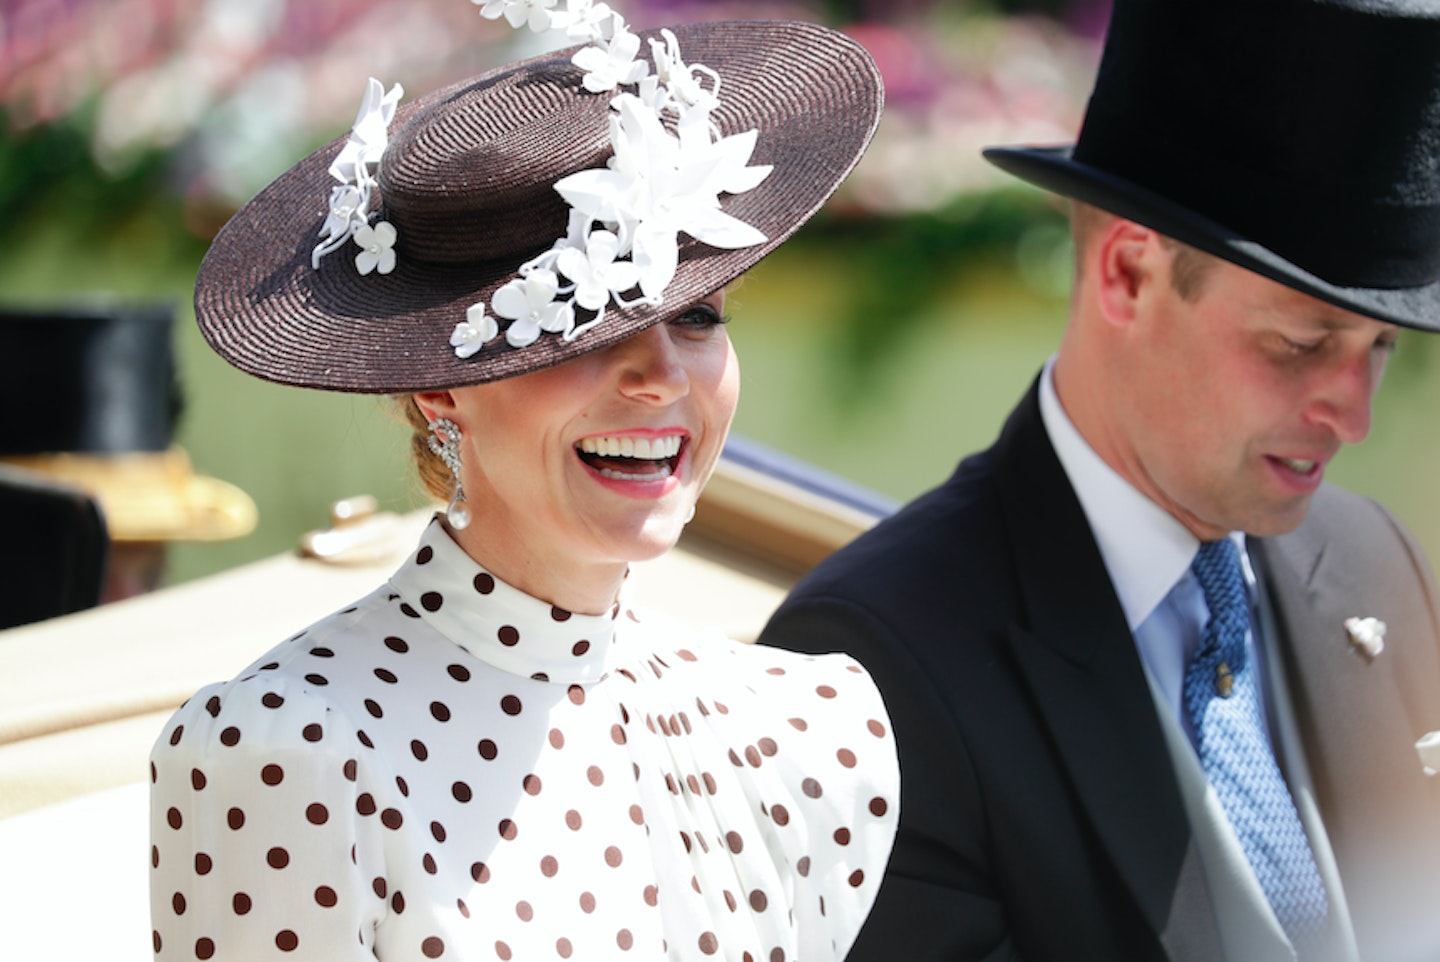 The Duchess of Cambridge steals the show in polka dot dress at